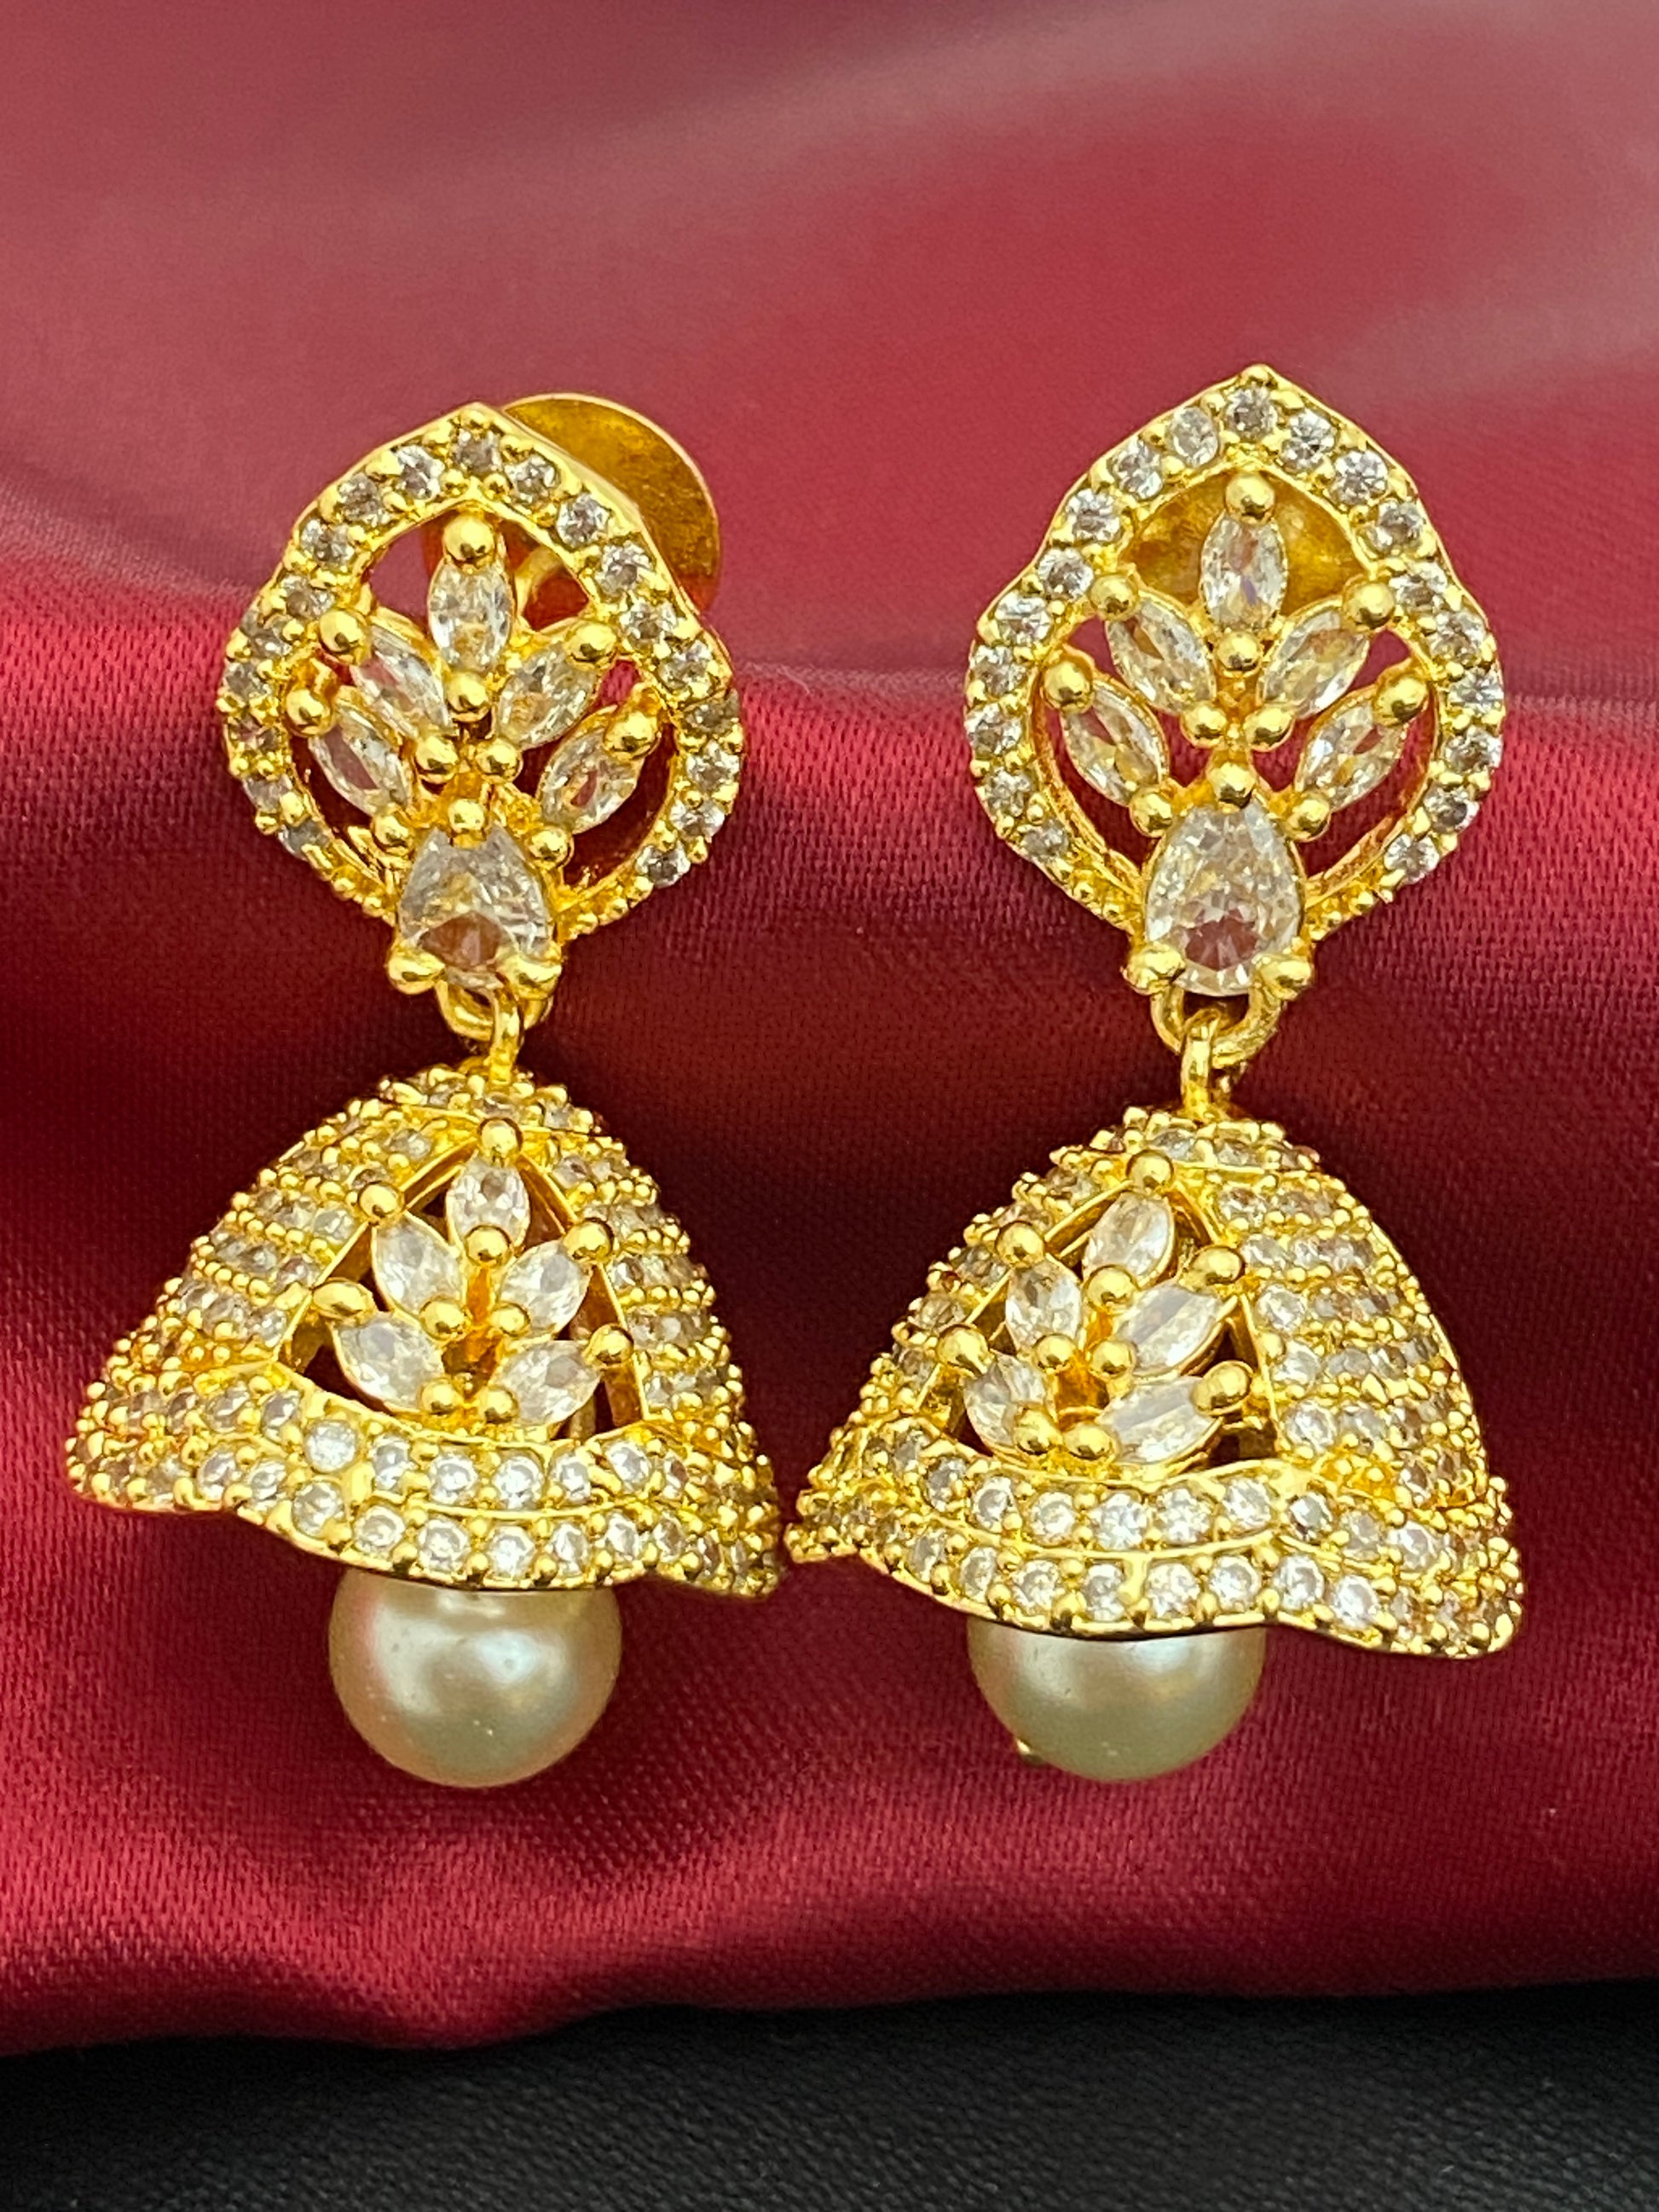 Charming Gold Plated White Color Jhumka Earrings With CZ Stones